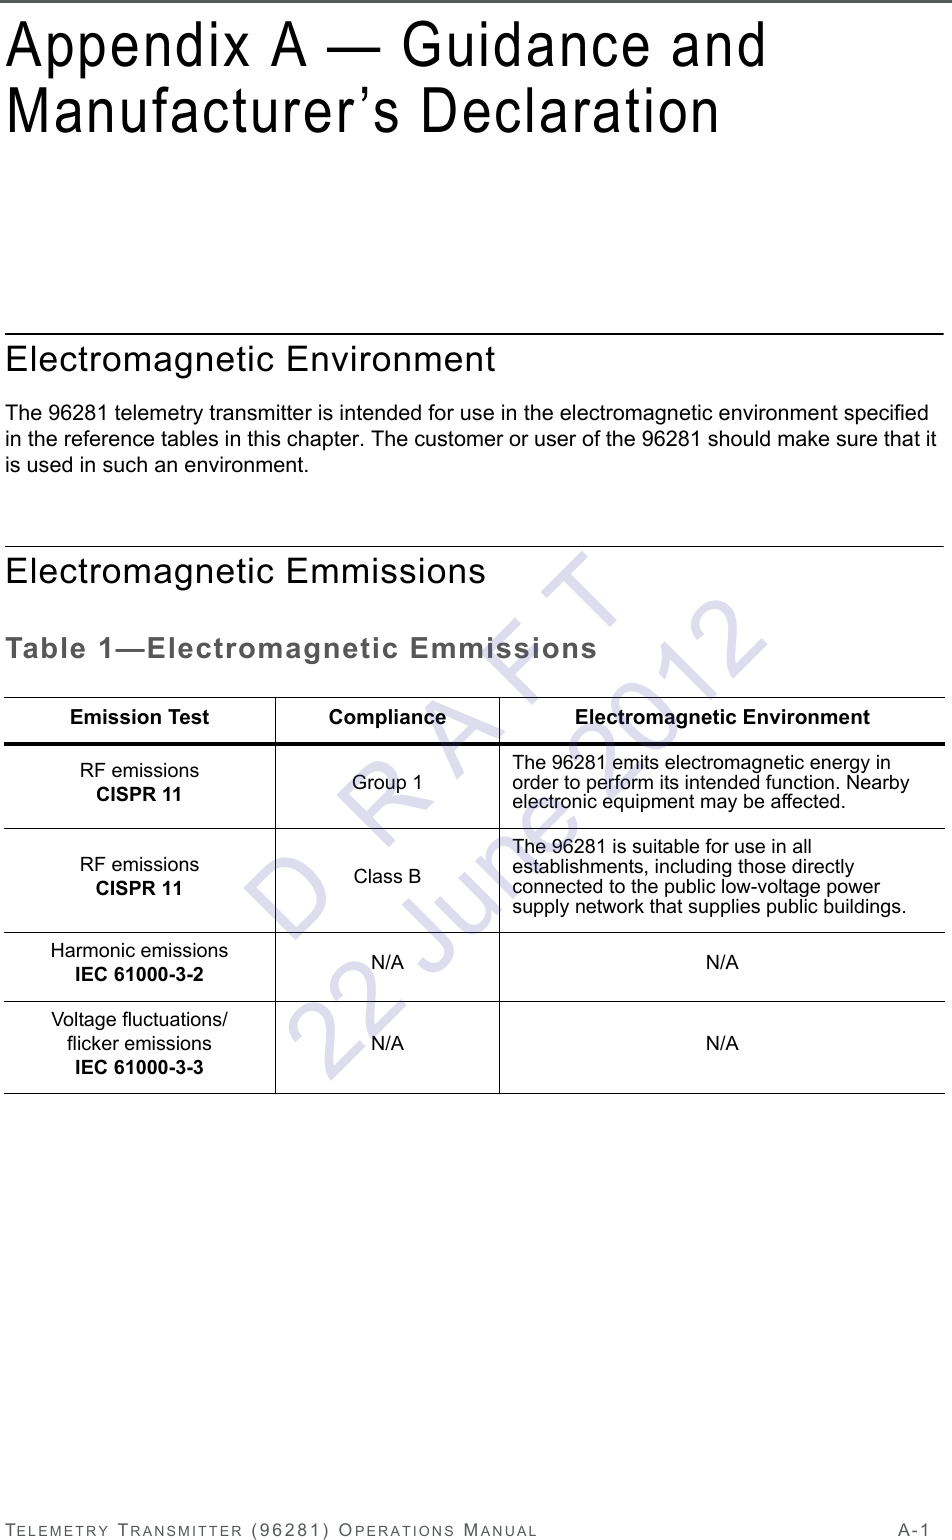 TELEMETRY TRANSMITTER (96281) OPERATIONS MANUAL A-1Appendix A — Guidance and Manufacturer’s DeclarationElectromagnetic EnvironmentThe 96281 telemetry transmitter is intended for use in the electromagnetic environment specified in the reference tables in this chapter. The customer or user of the 96281 should make sure that it is used in such an environment.Electromagnetic EmmissionsTable 1—Electromagnetic EmmissionsEmission Test Compliance Electromagnetic EnvironmentRF emissions CISPR 11 Group 1 The 96281 emits electromagnetic energy in order to perform its intended function. Nearby electronic equipment may be affected.RF emissions CISPR 11 Class BThe 96281 is suitable for use in all establishments, including those directly connected to the public low-voltage power supply network that supplies public buildings. Harmonic emissions IEC 61000-3-2 N/A N/AVoltage fluctuations/flicker emissions IEC 61000-3-3N/A N/AD  R A F T 22 June 2012